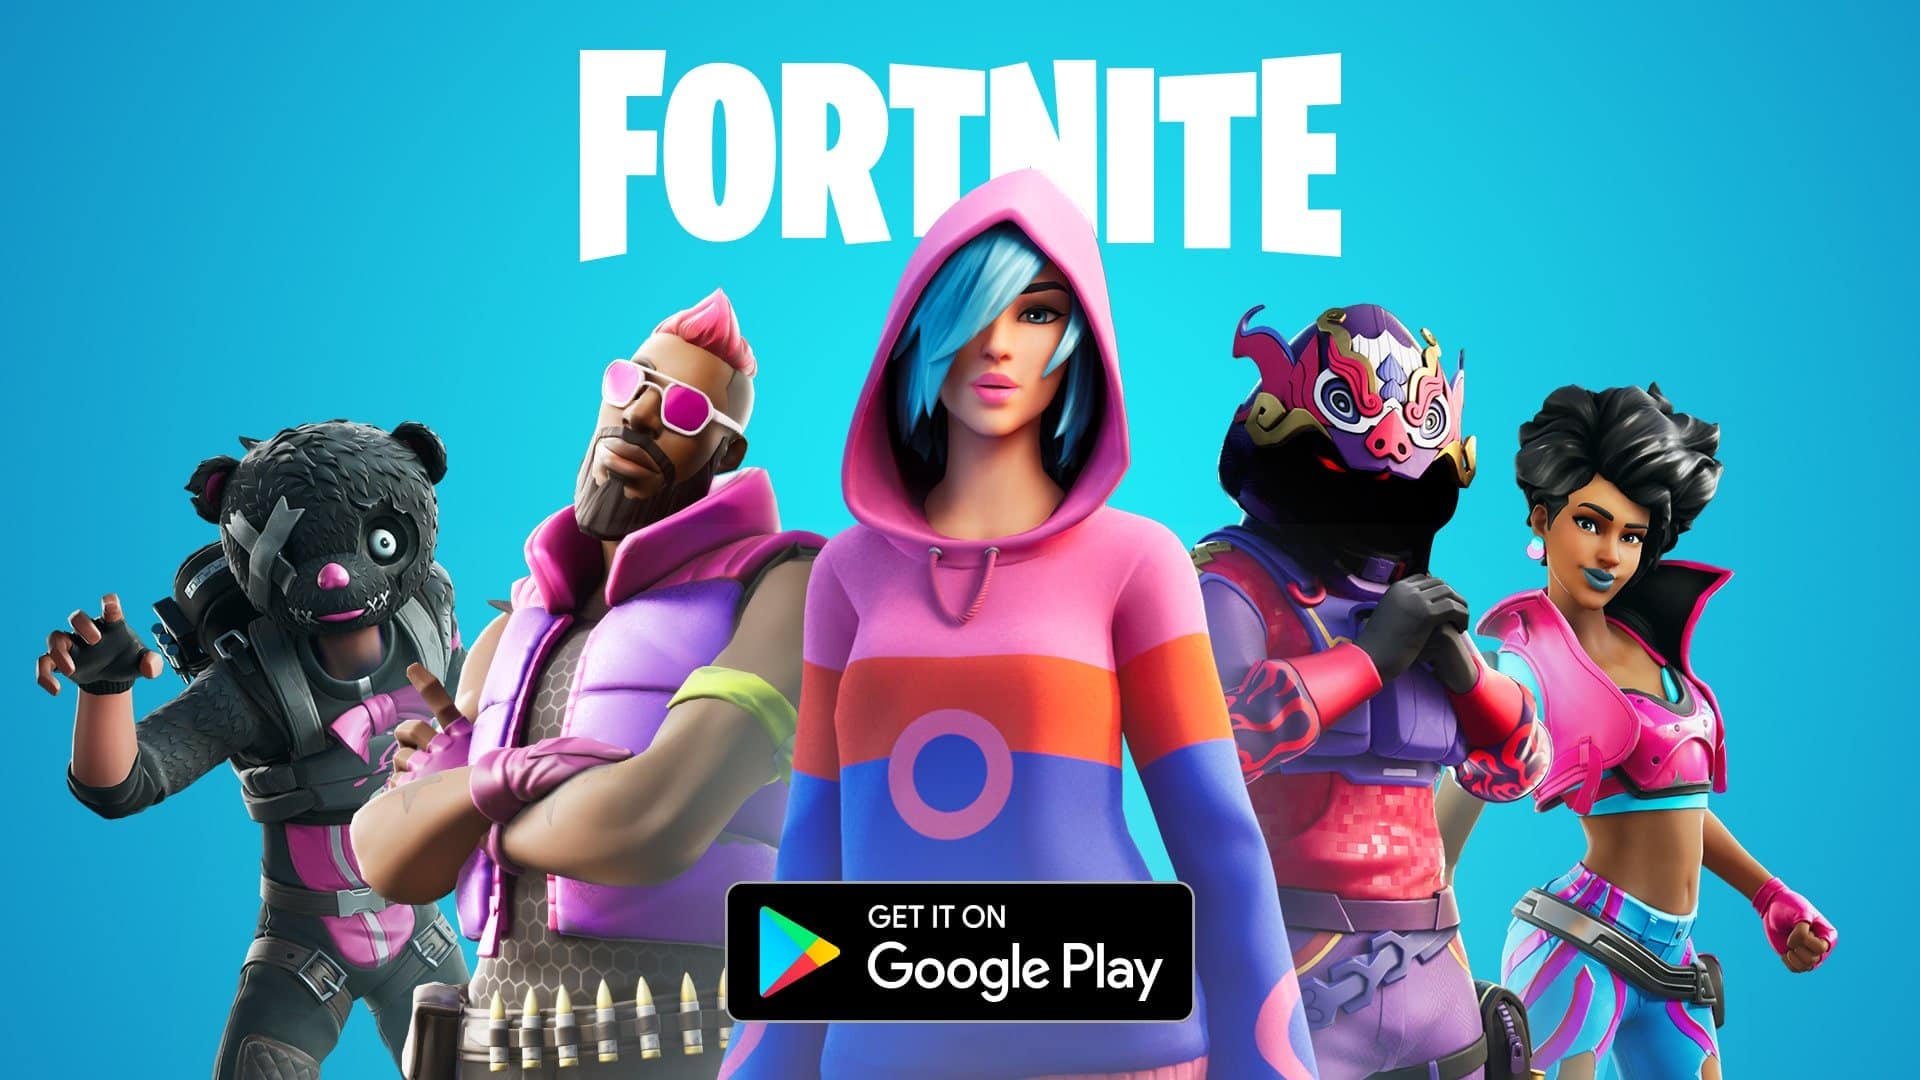 Fortnite Finally Comes to Google Play Store 18 Months After its Launch